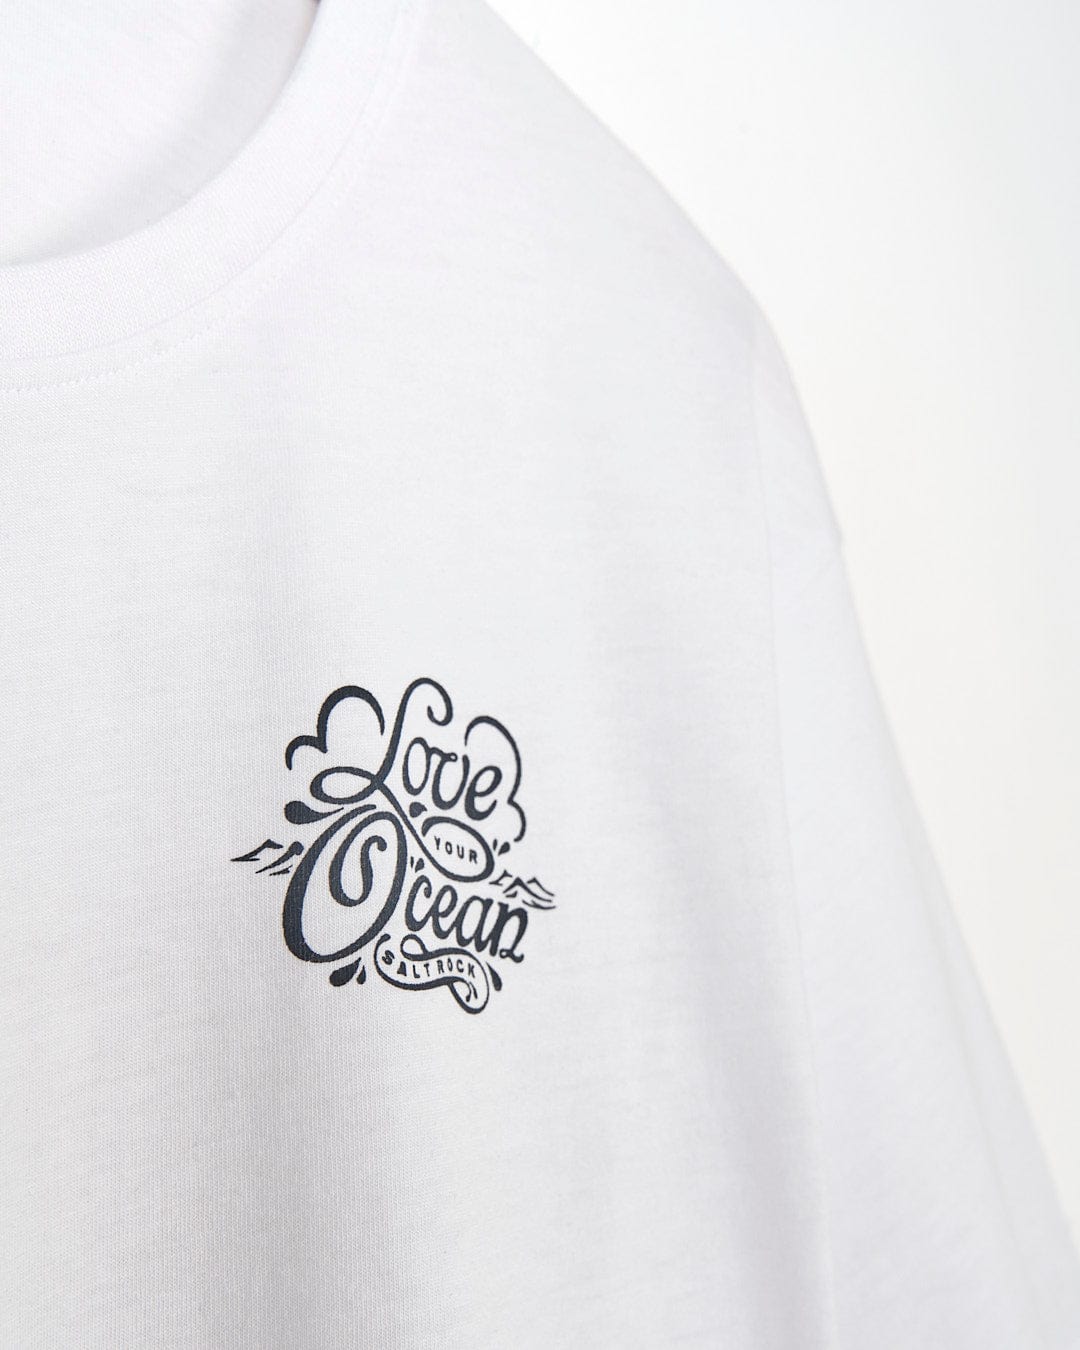 An Astra - Womens Short Sleeve T-Shirt - White from Saltrock with the words love ocean on it.